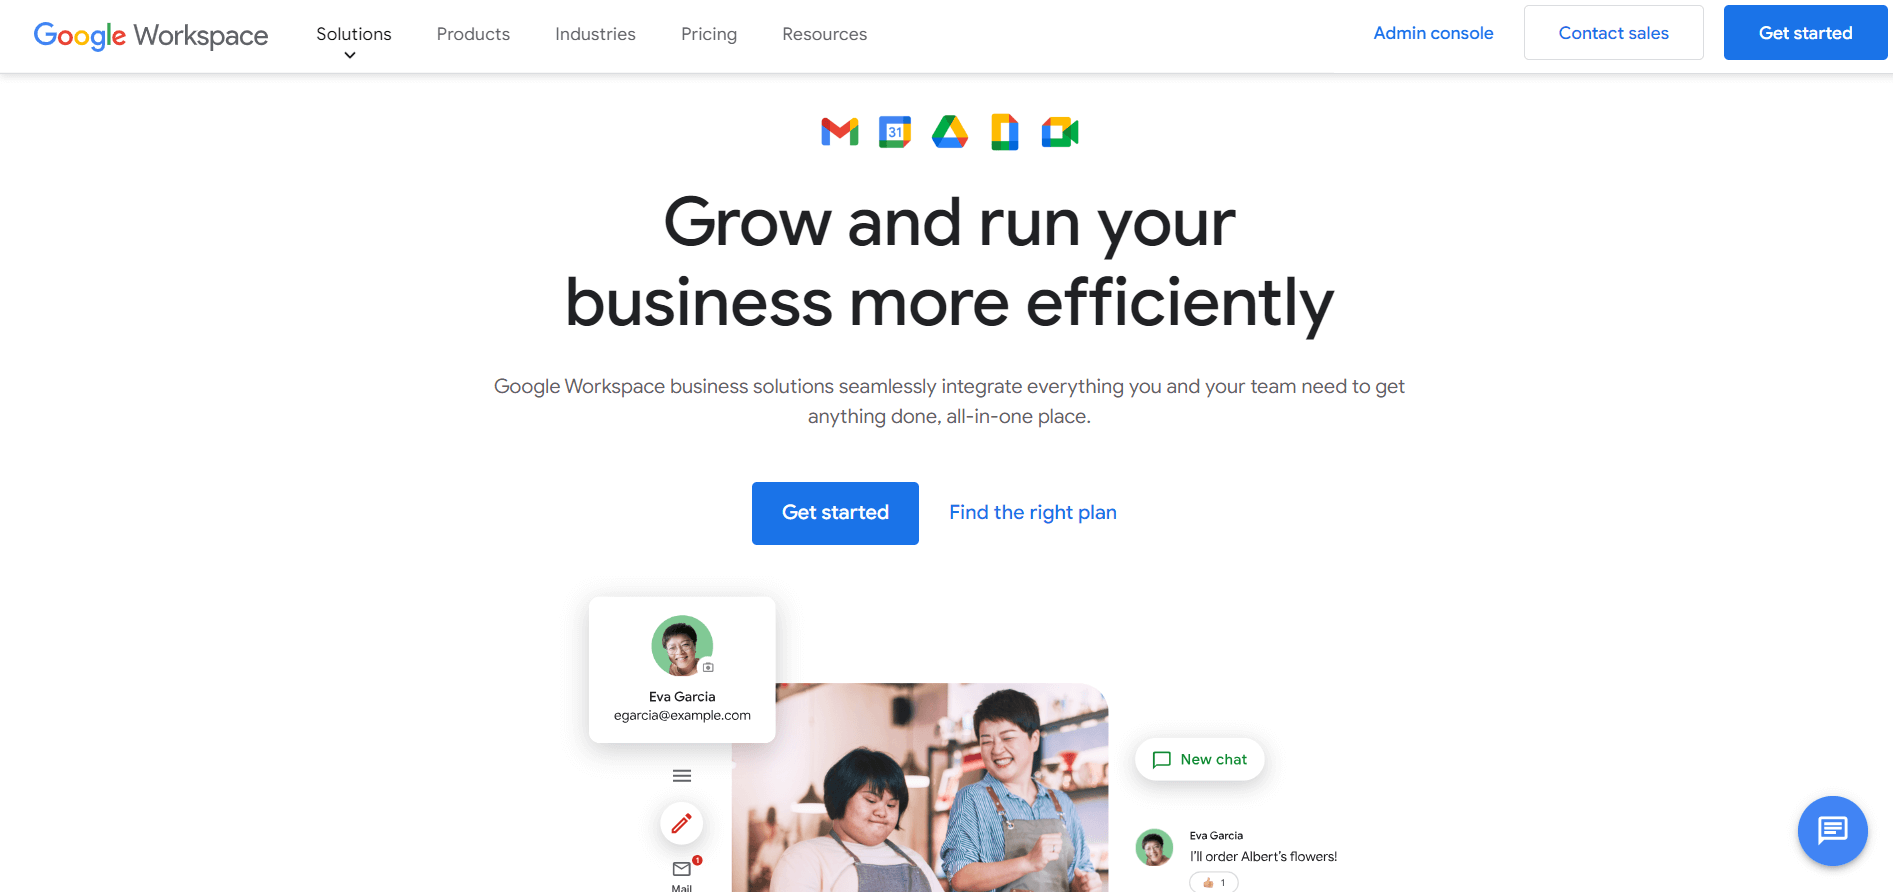 Google Workspace screenshot with the motto "Grow and run your business more efficiently"